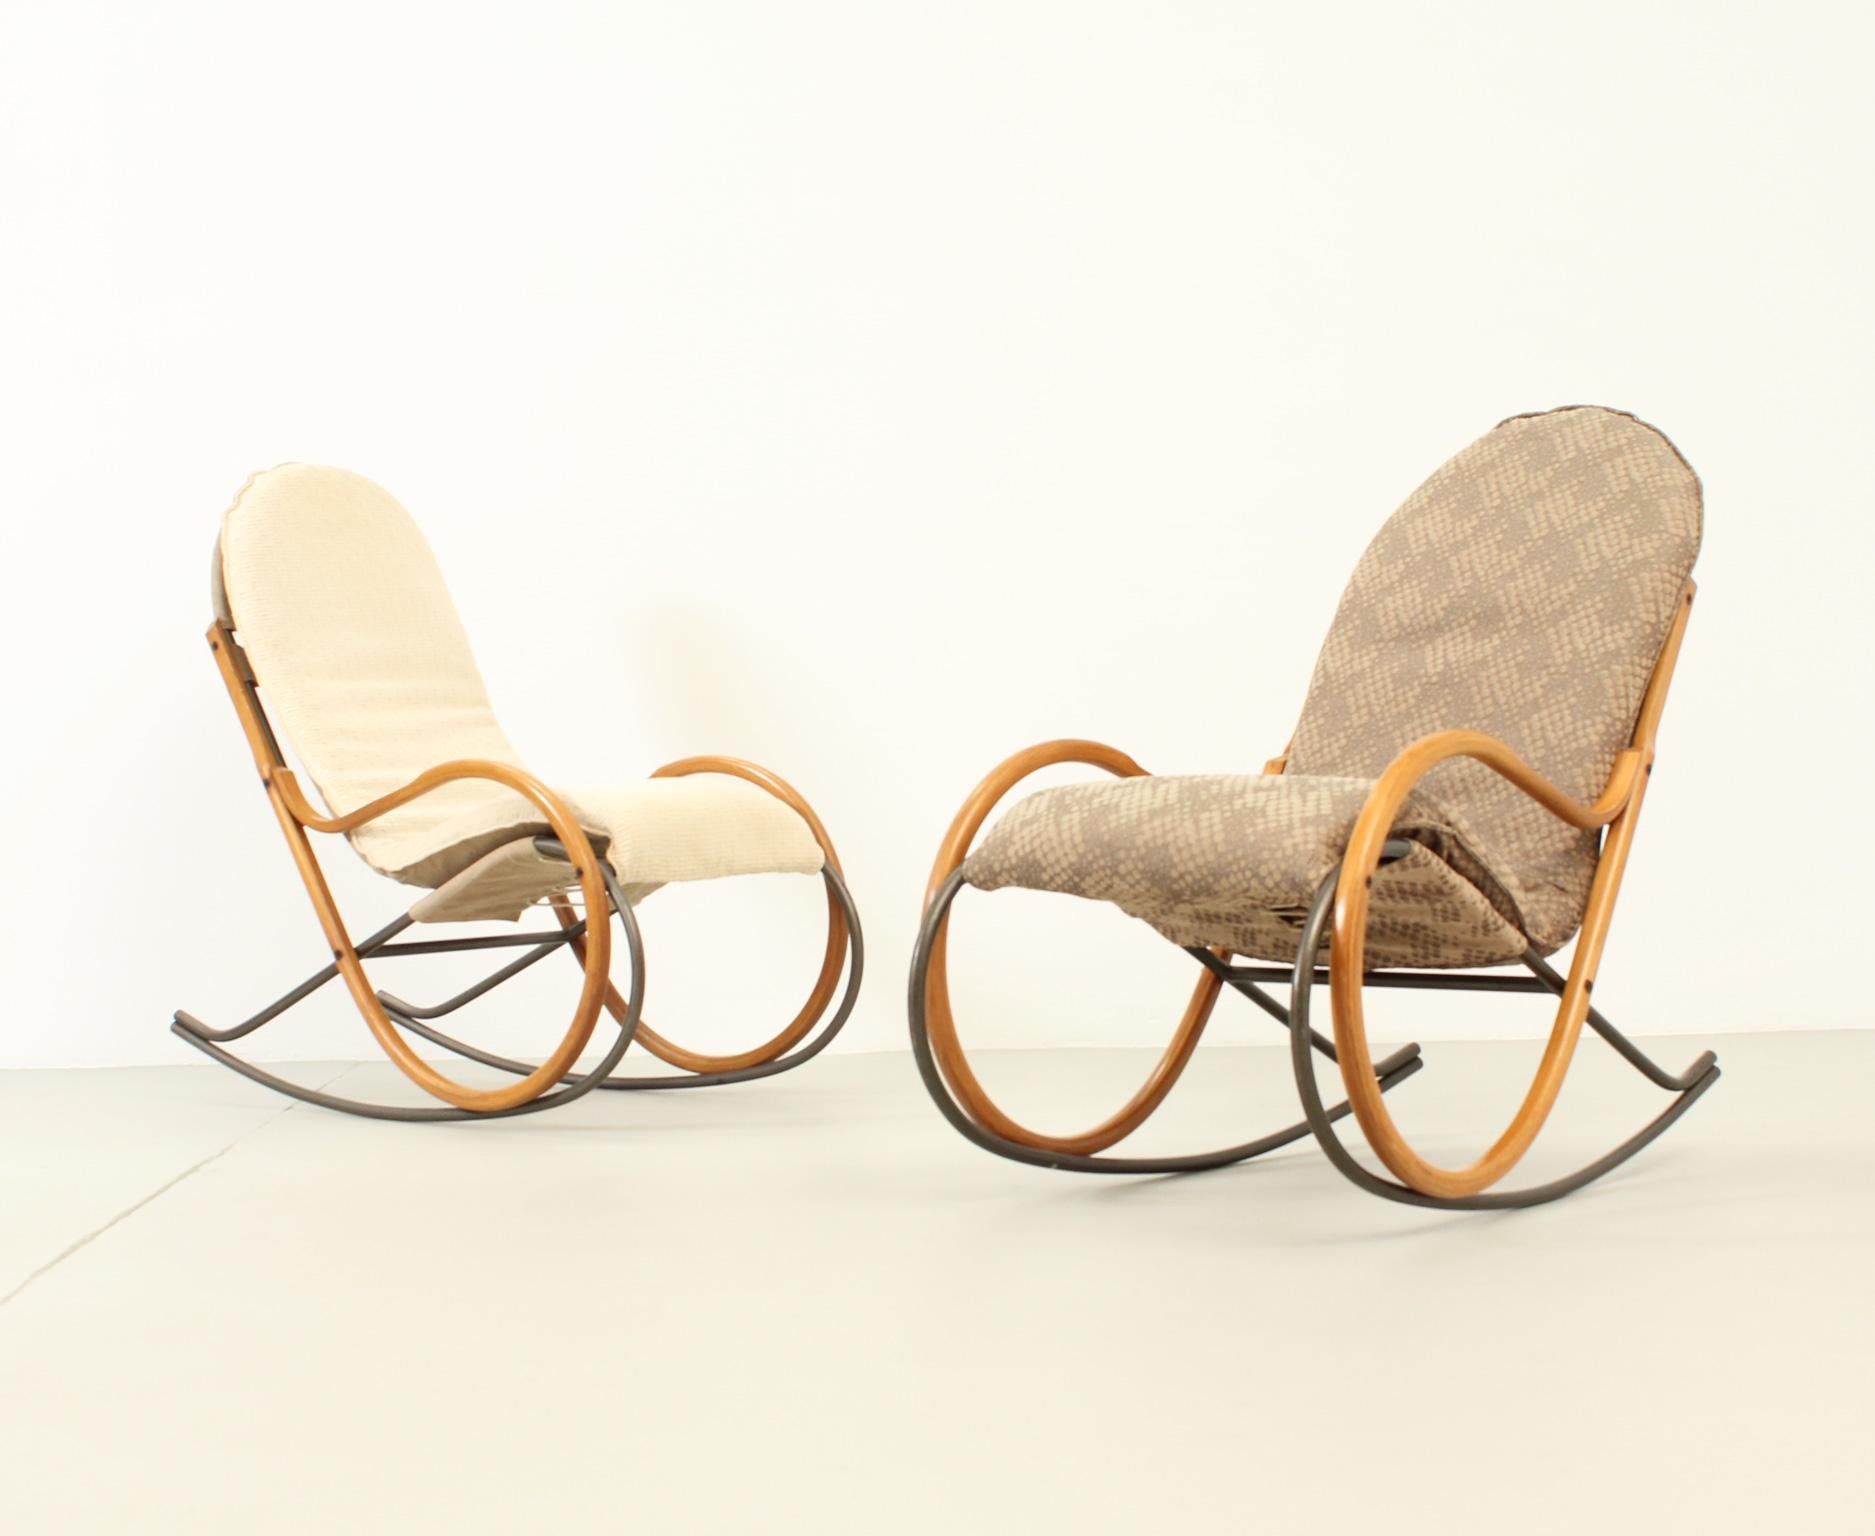 Pair of Nonna rocking chairs designed in 1972 by american designer Paul Tuttle for Strässle International, Switzerland. Metal structure finished in bronze and bentwood oak wood and upholstery with original fabrics.